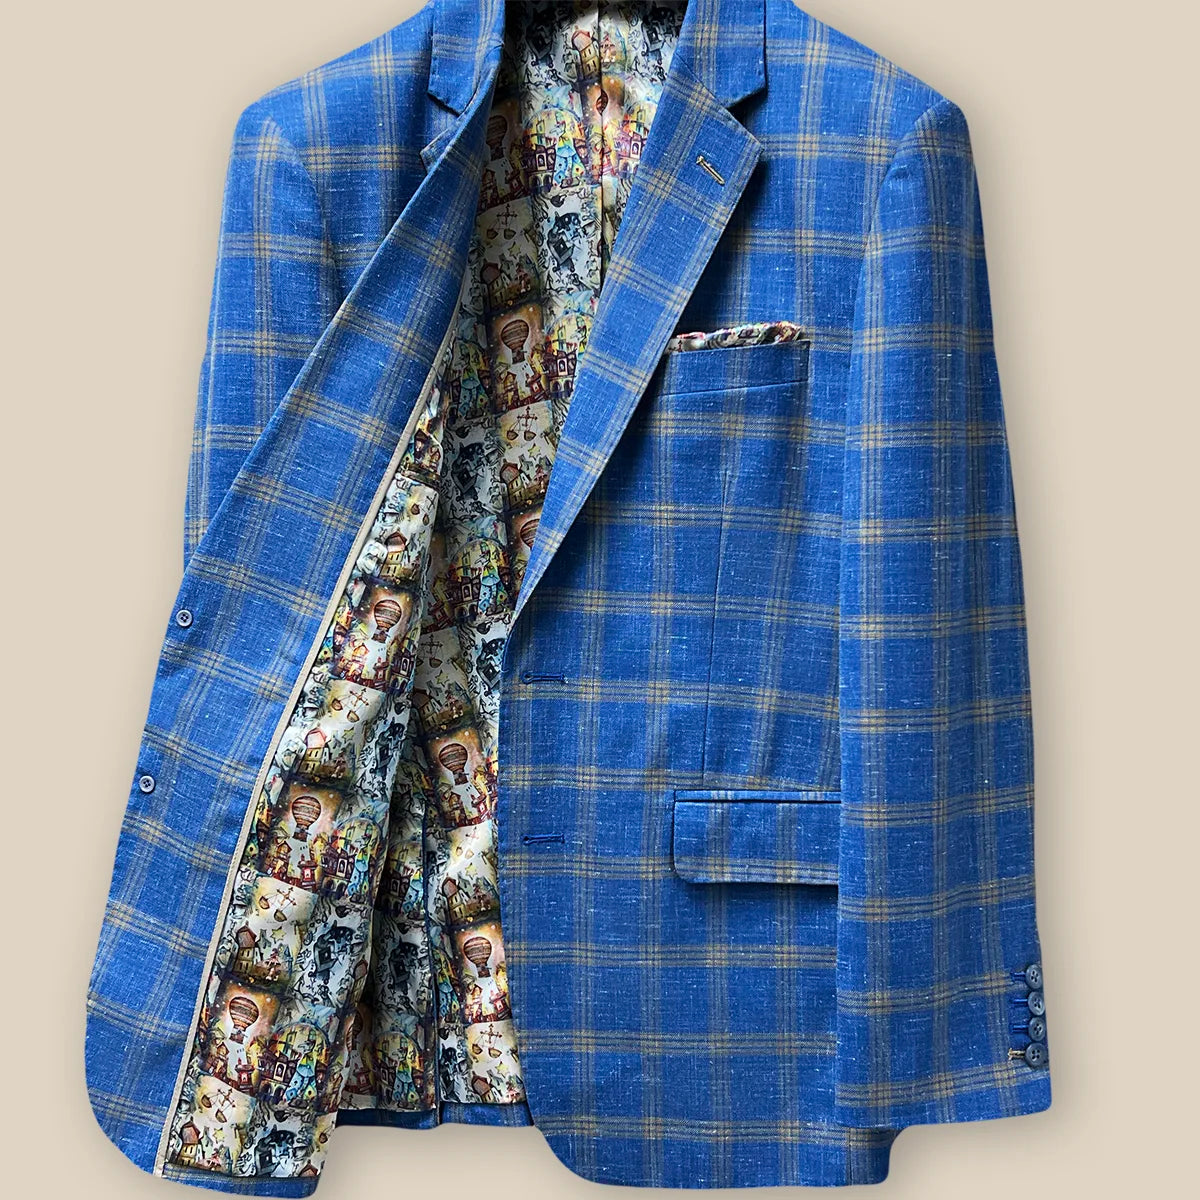 Inside right view showing the inner details of a sky blue with tan windowpane men's sport coat.